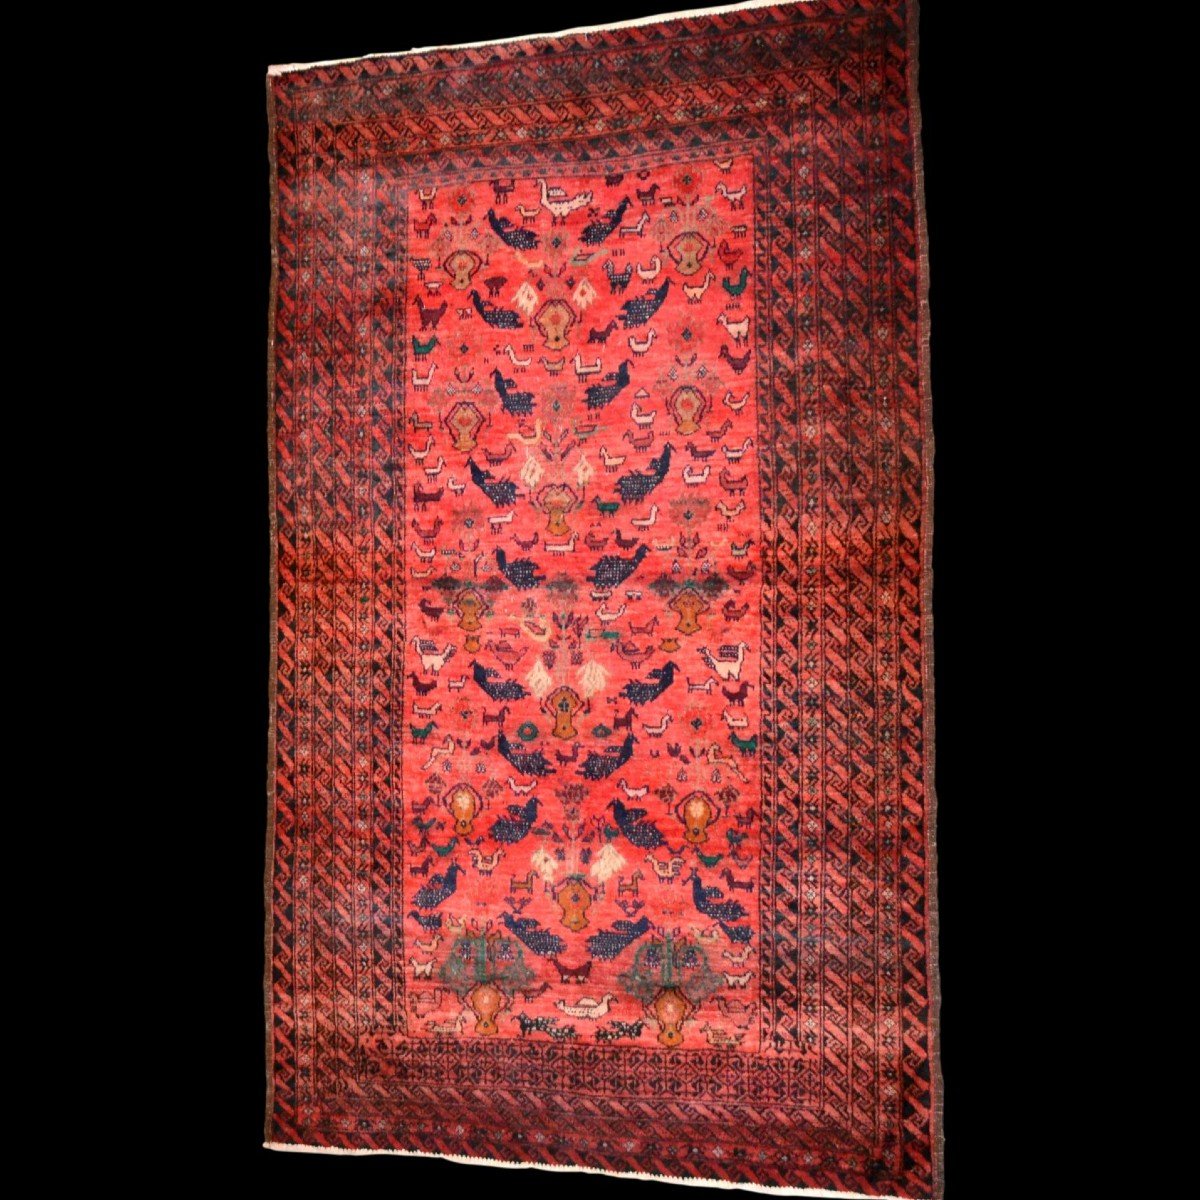 Baluche, Animal Decor, 115 X 193 Cm, Hand-knotted Wool In Iran, 1950-1960, Very Good Condition-photo-4